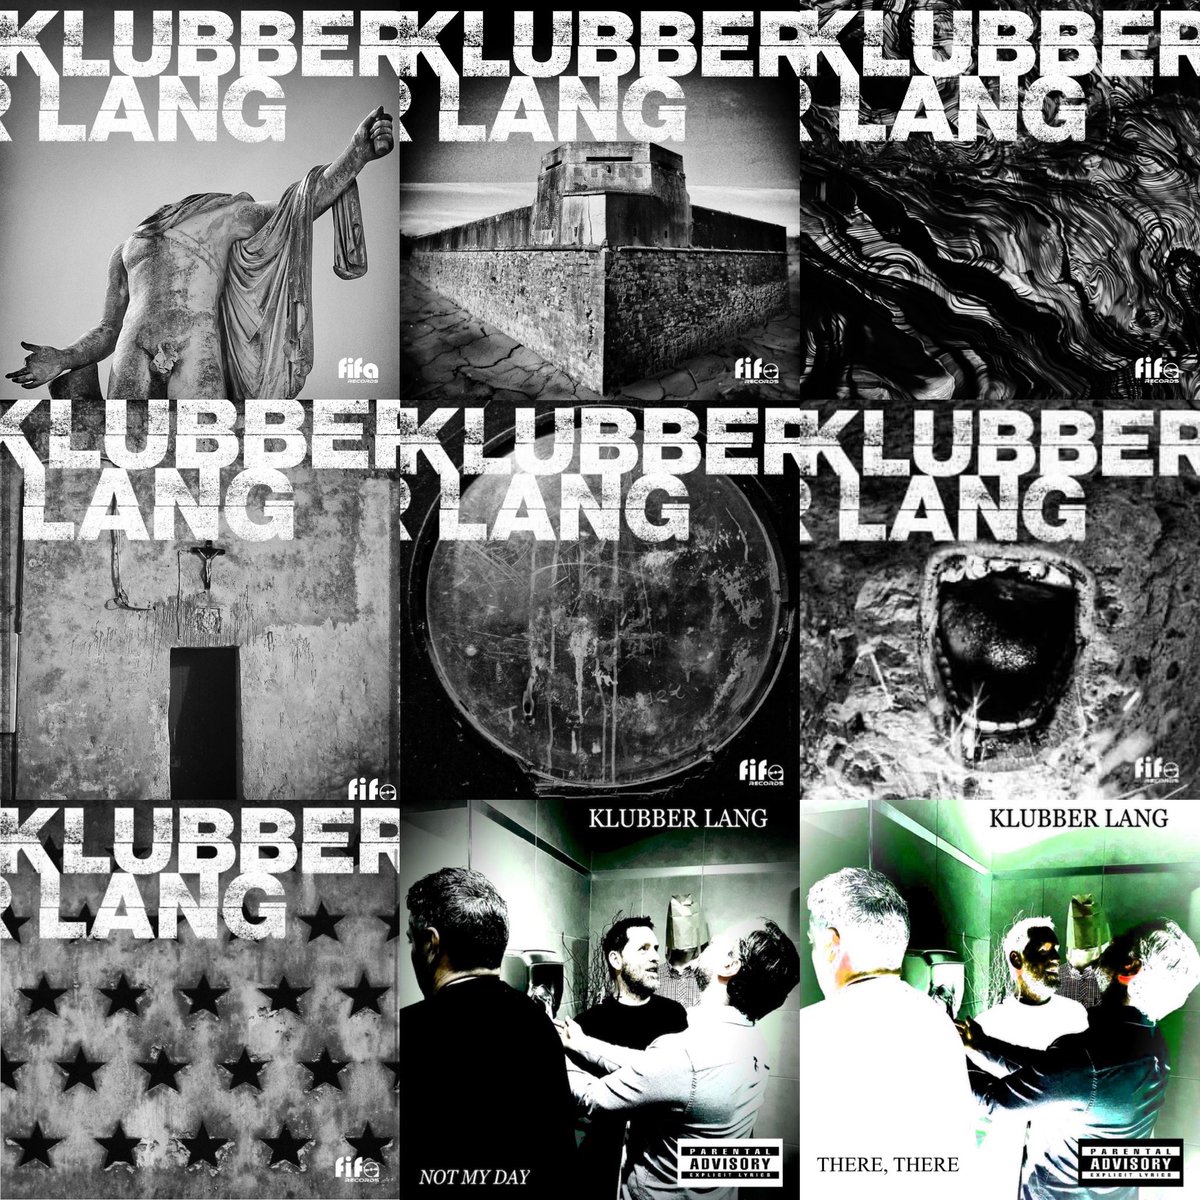 Bandcamp Friday today All 9 of our singles are free or pay what you want. @CorkFifa @FIFARecordsPR Get some new music, lots of great bands out there. @judith_fisher Link ⬇️⬇️ klubberlang.bandcamp.com